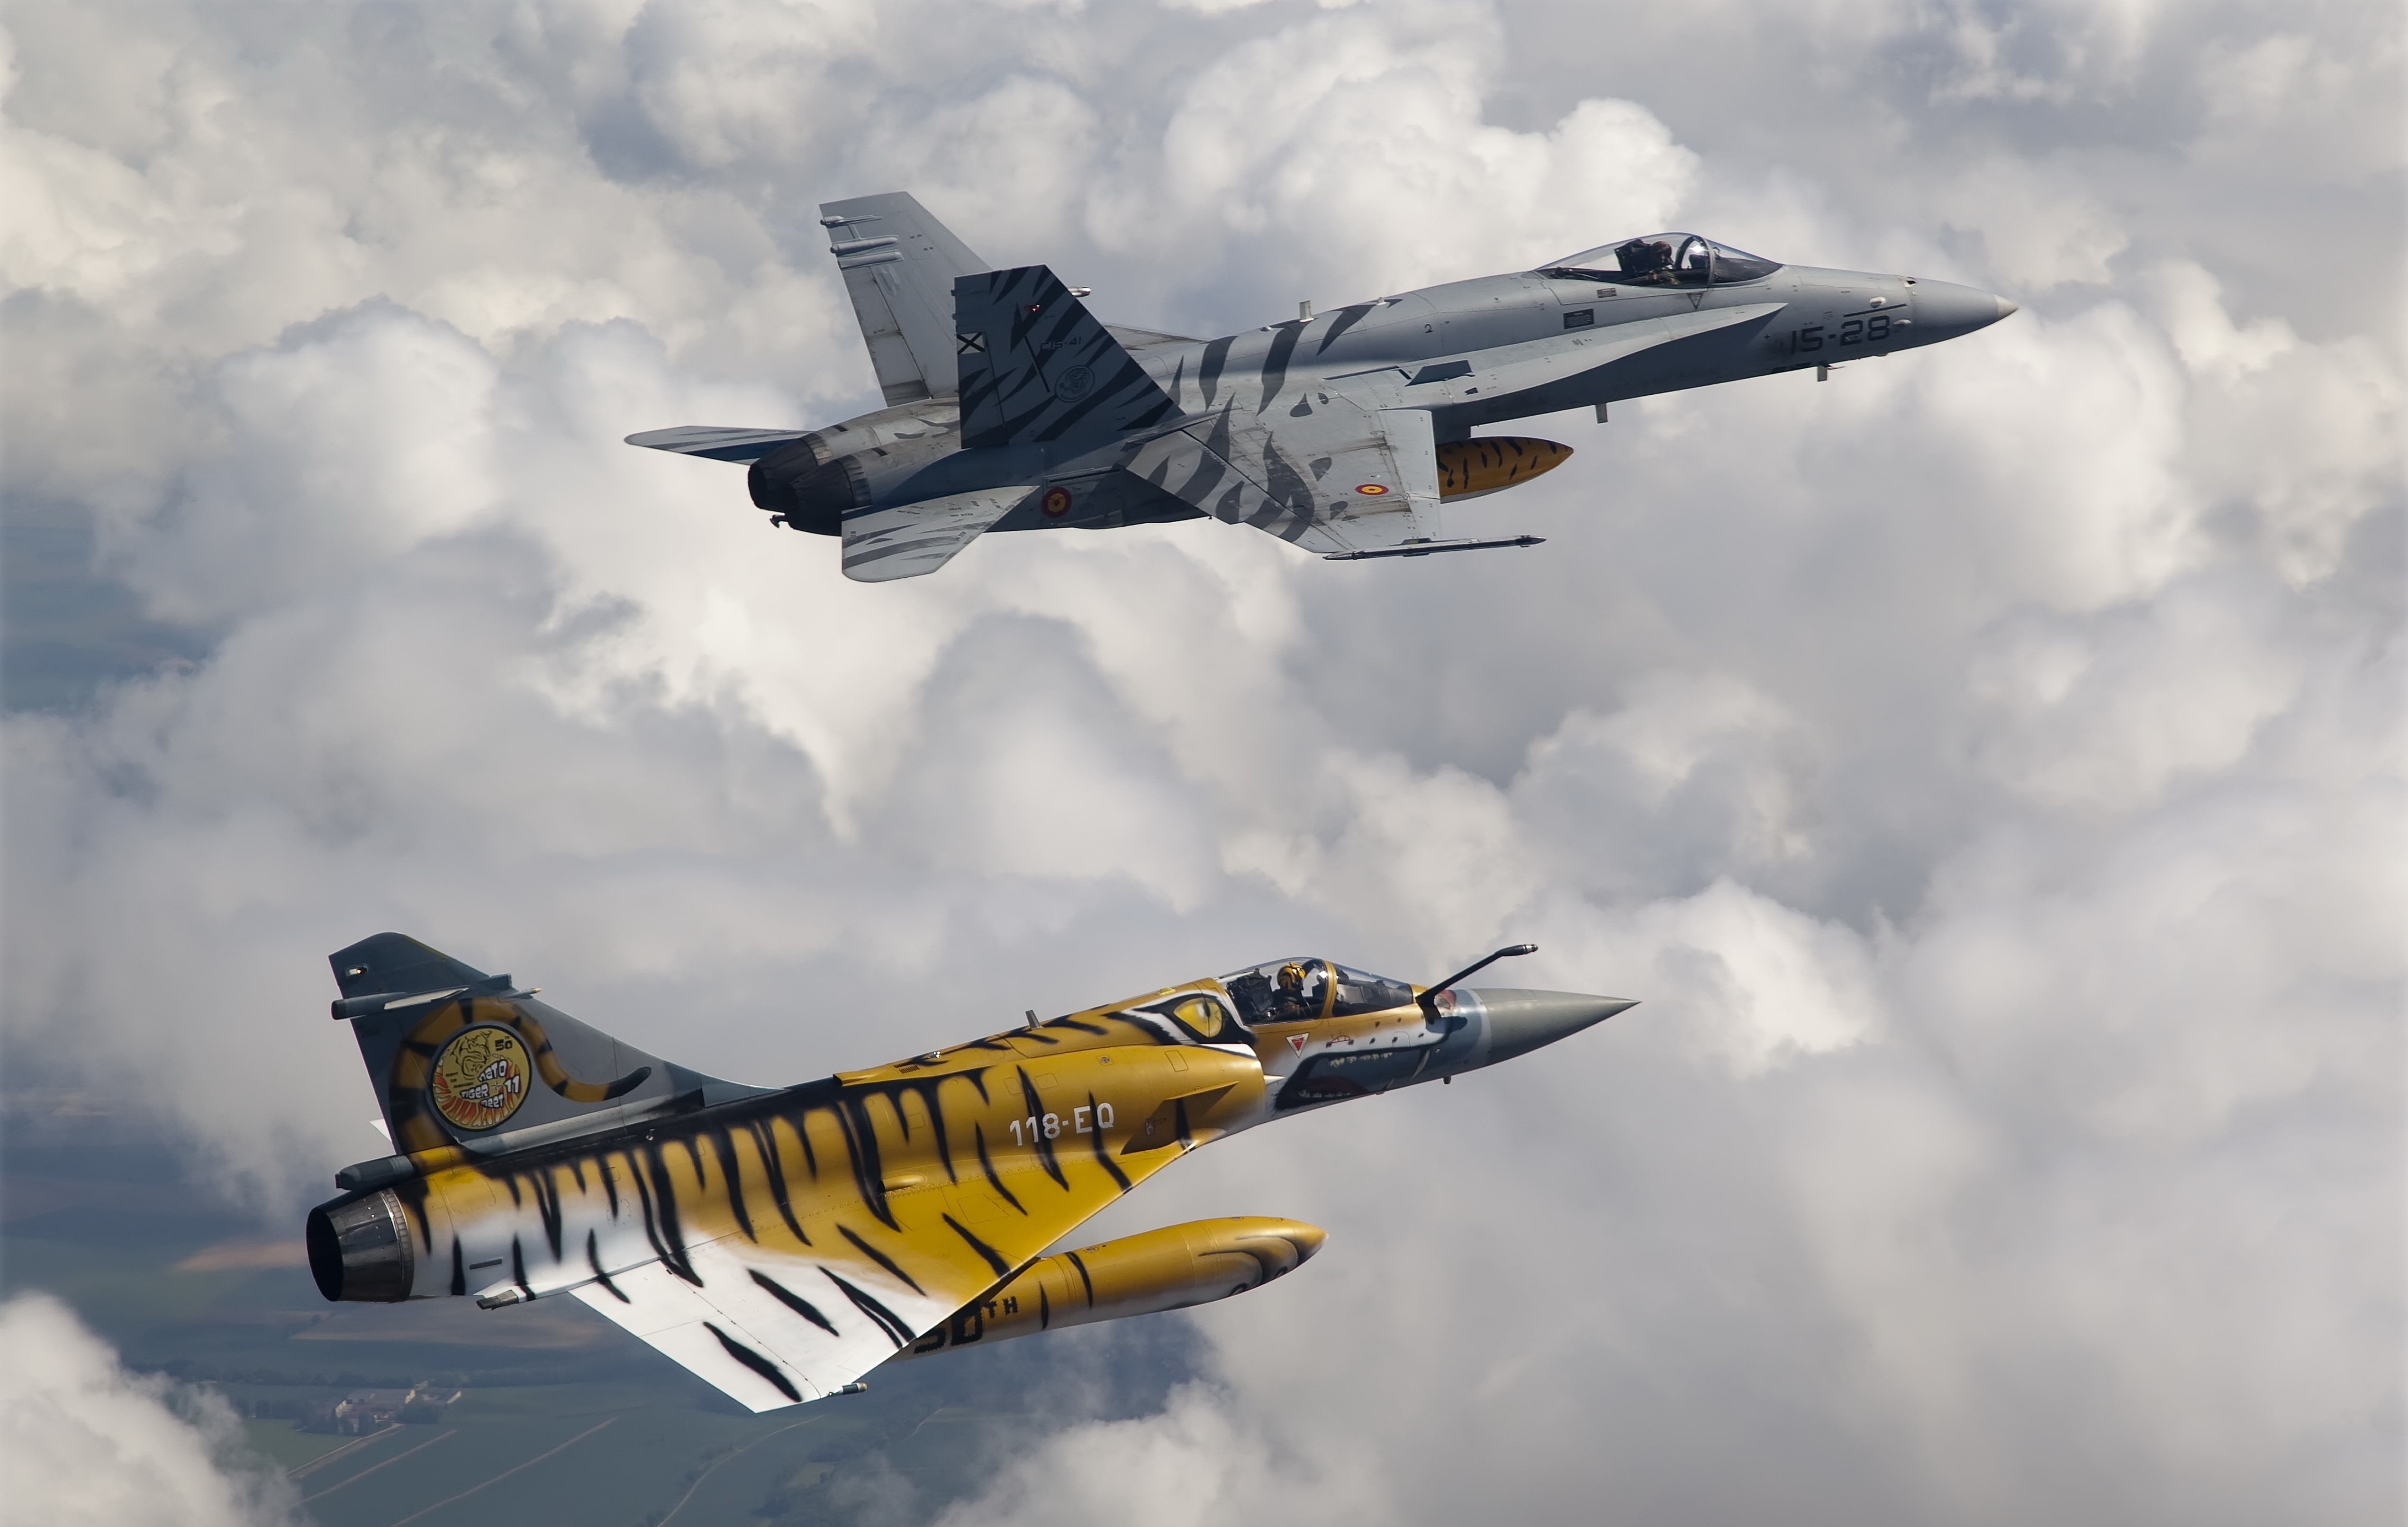 gray and yellow aircrafts, The sky, Clouds, Flight, Fighter, Height